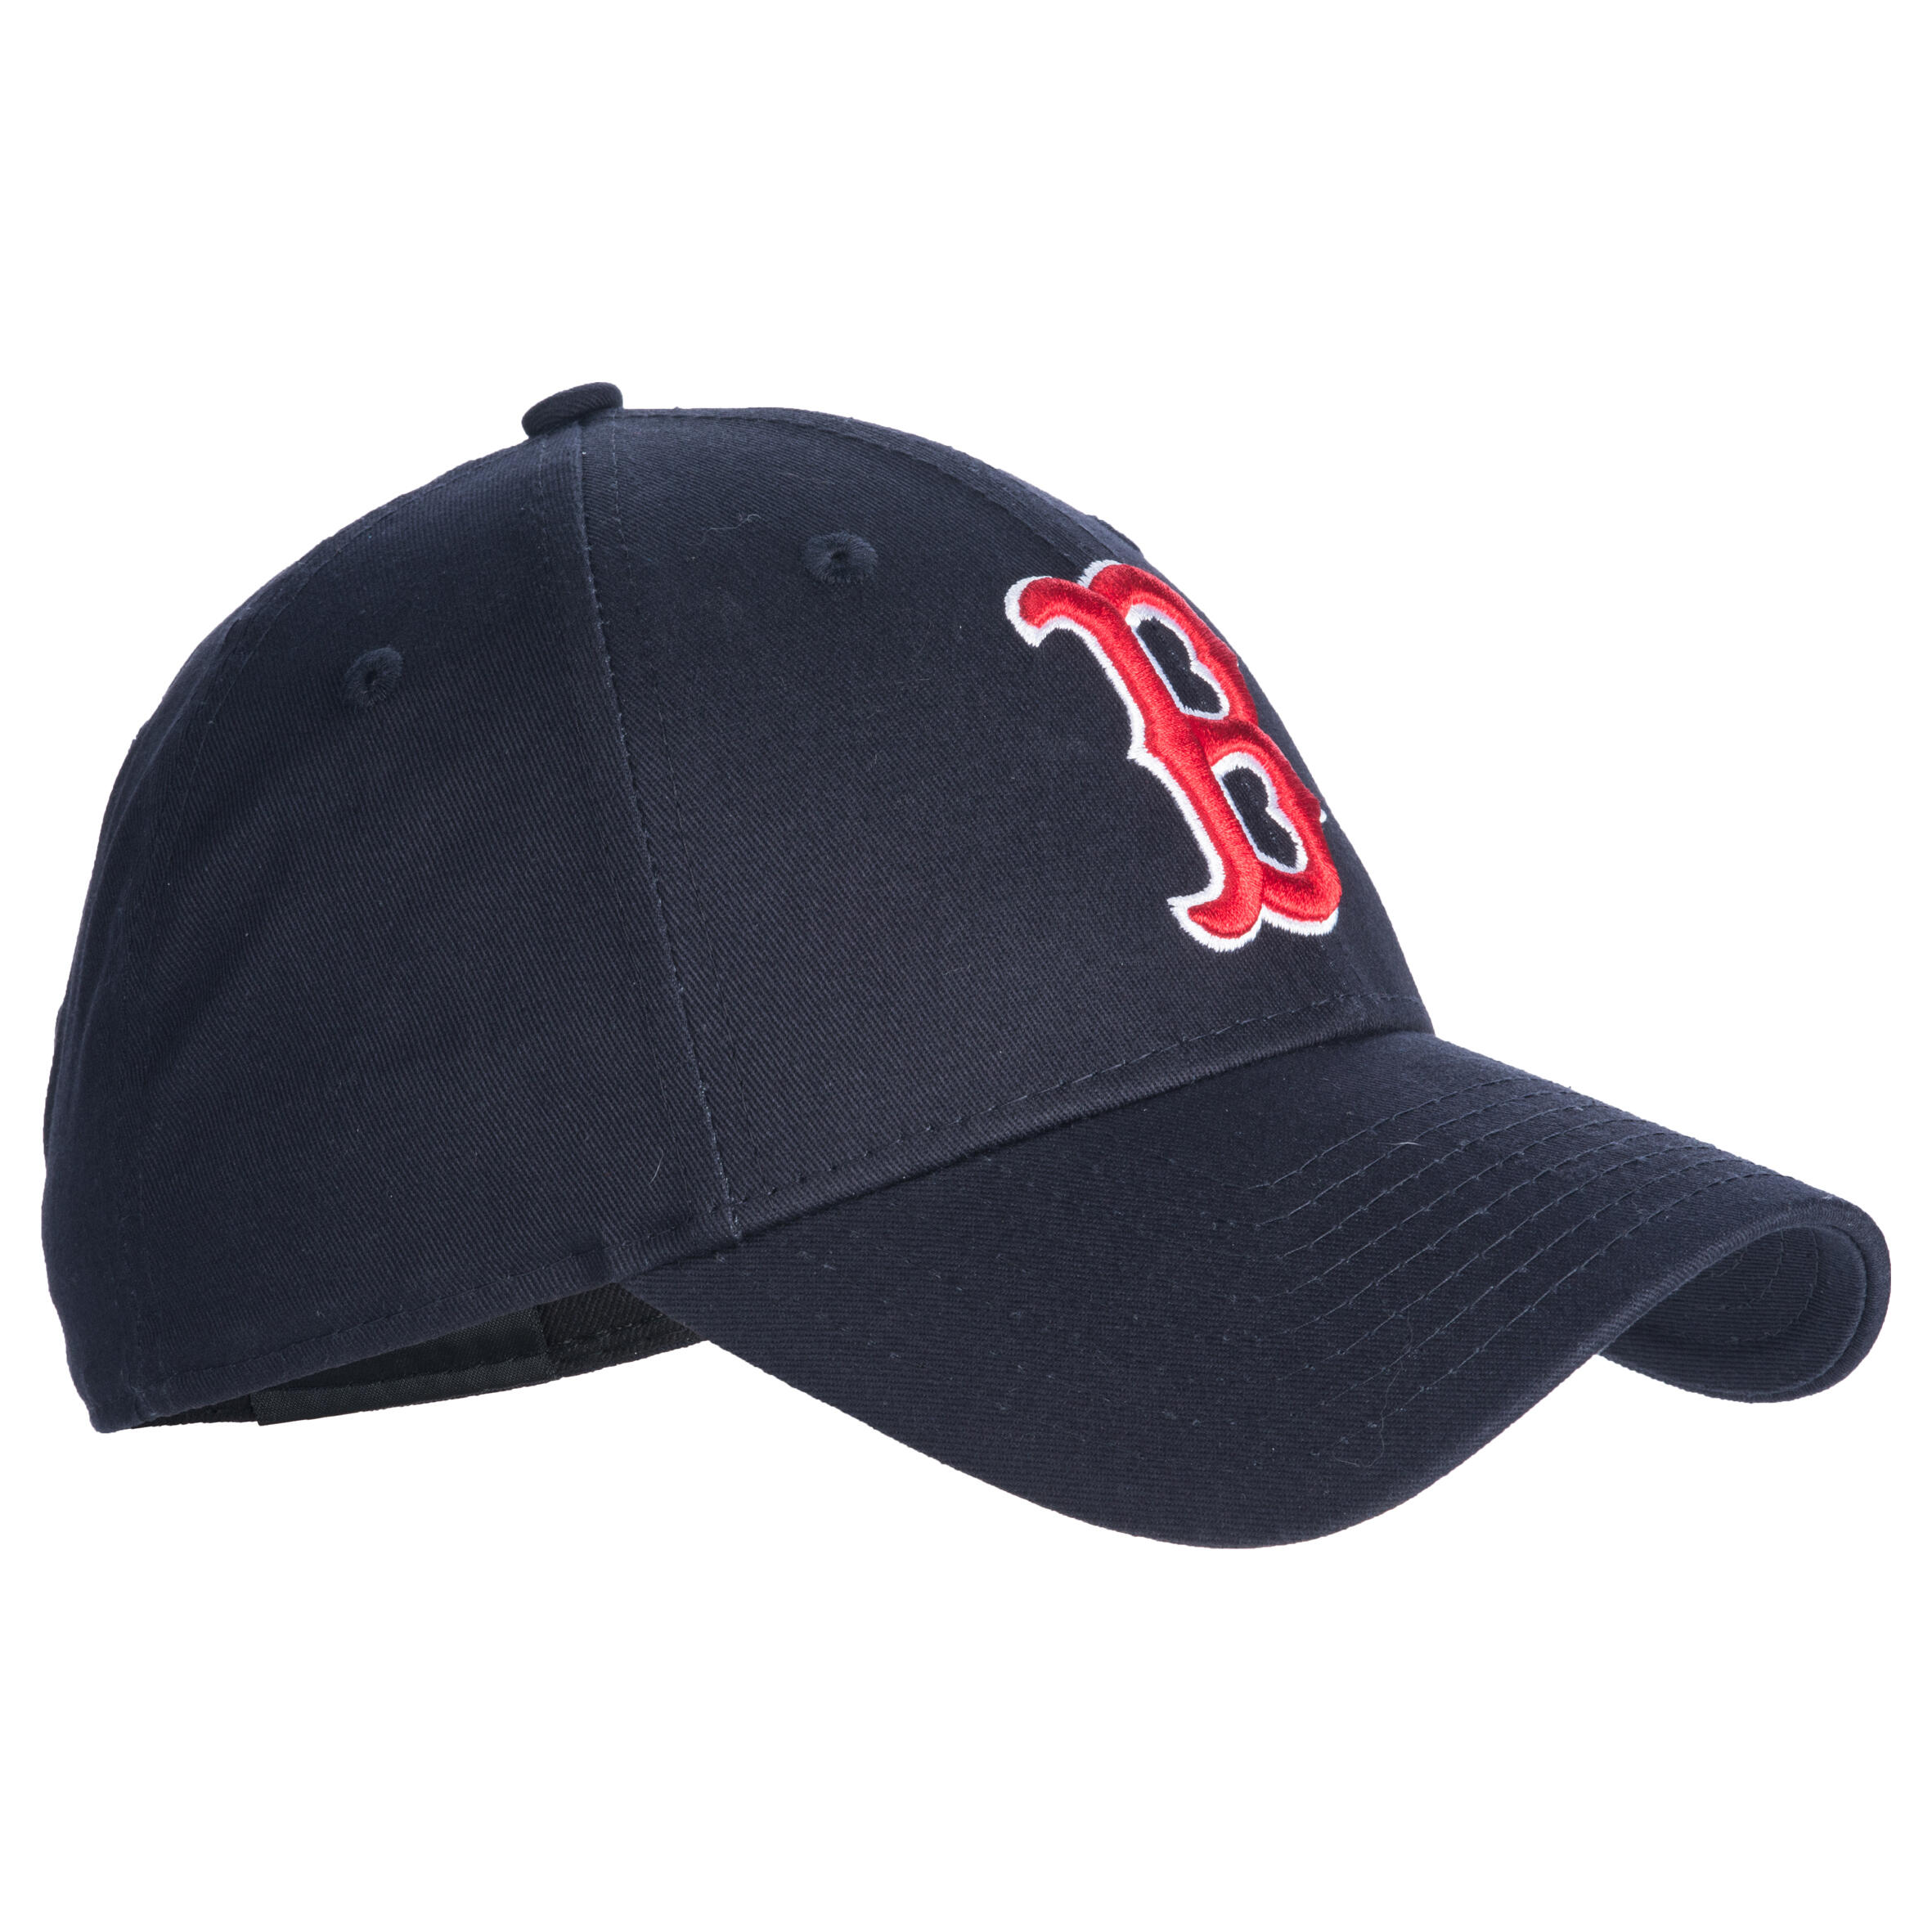 Official New Era Boston Red Sox League Blue 9FORTY Cap 1326_253 1326_253  1326_253